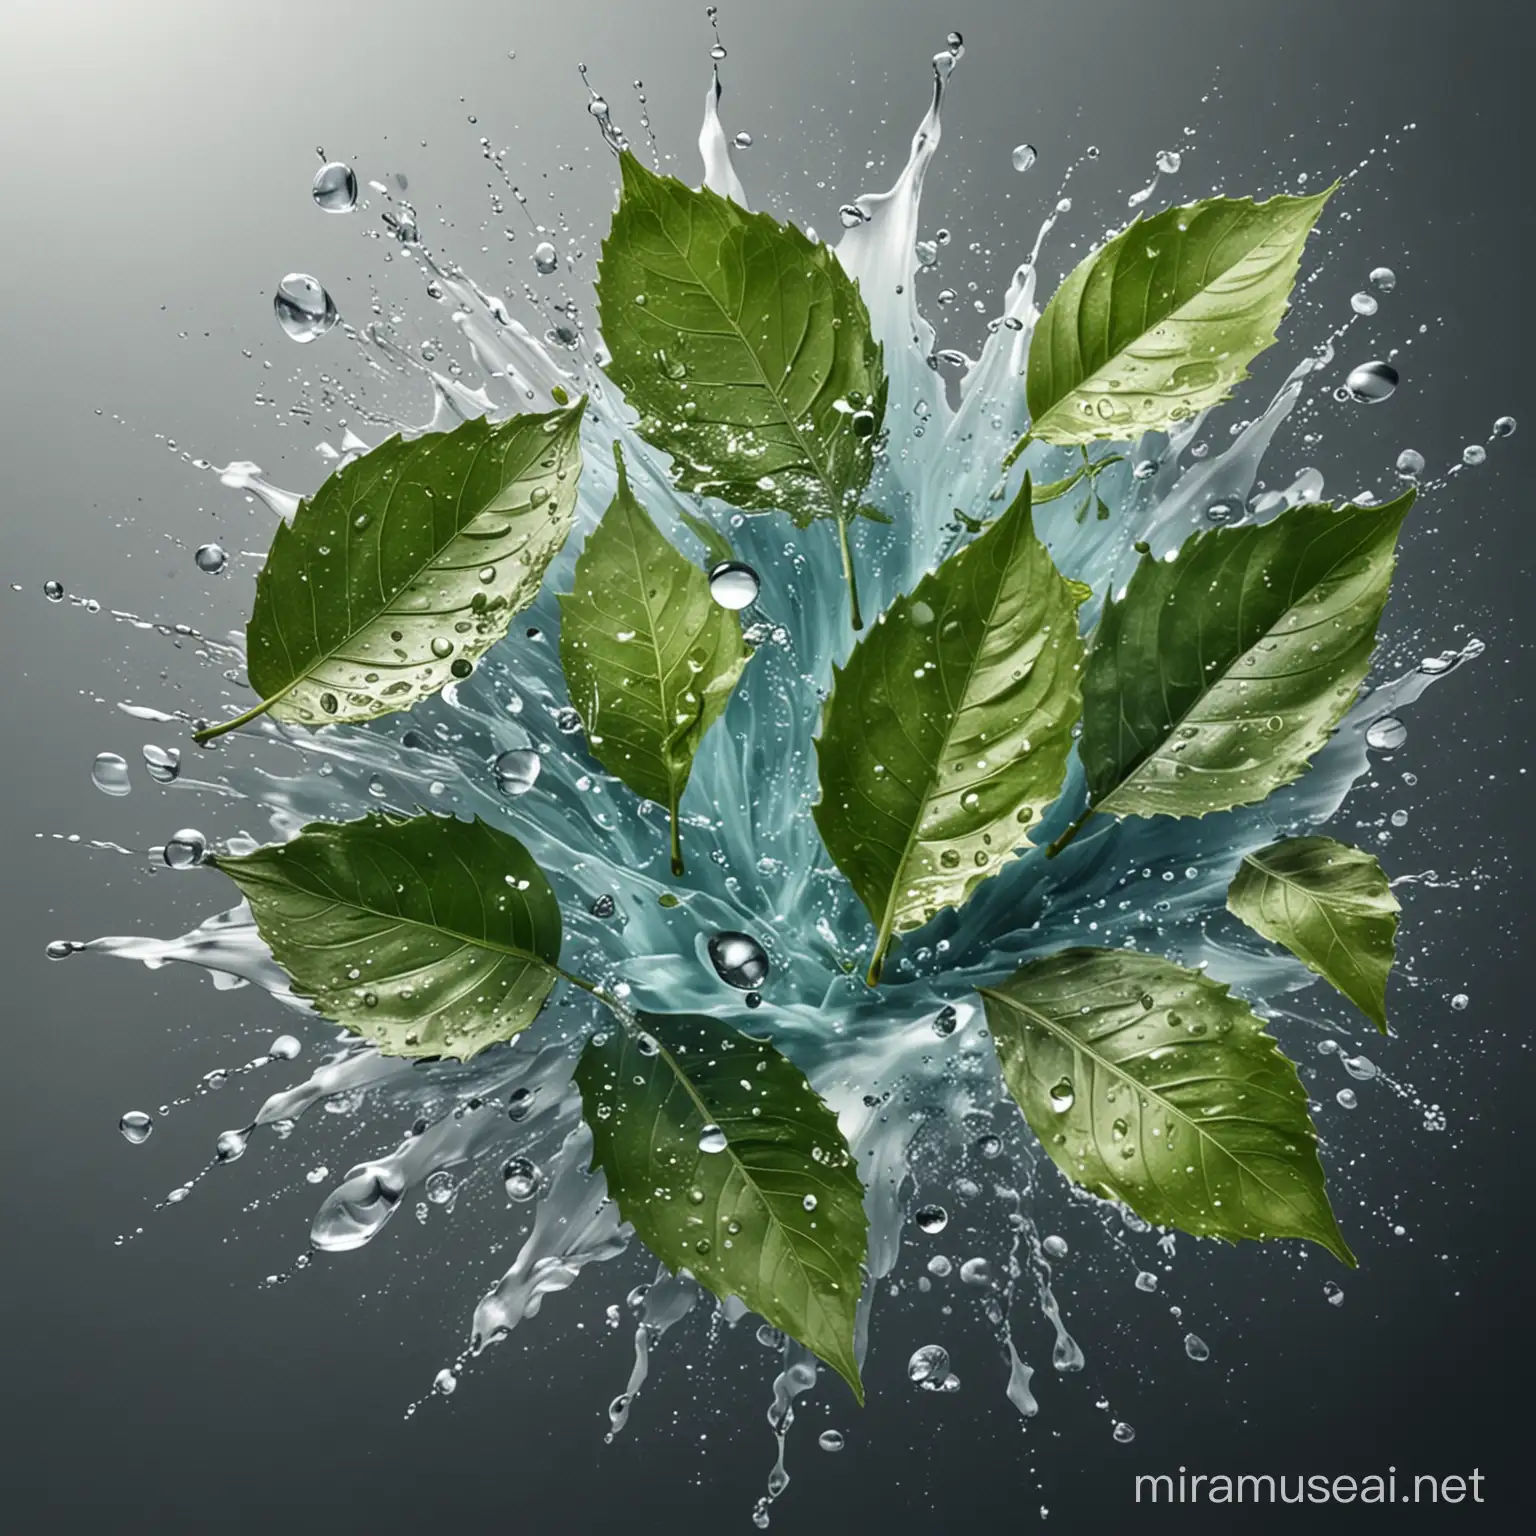 Refreshing Cosmetics with Water Splashes and Green Leaves Realistic Art